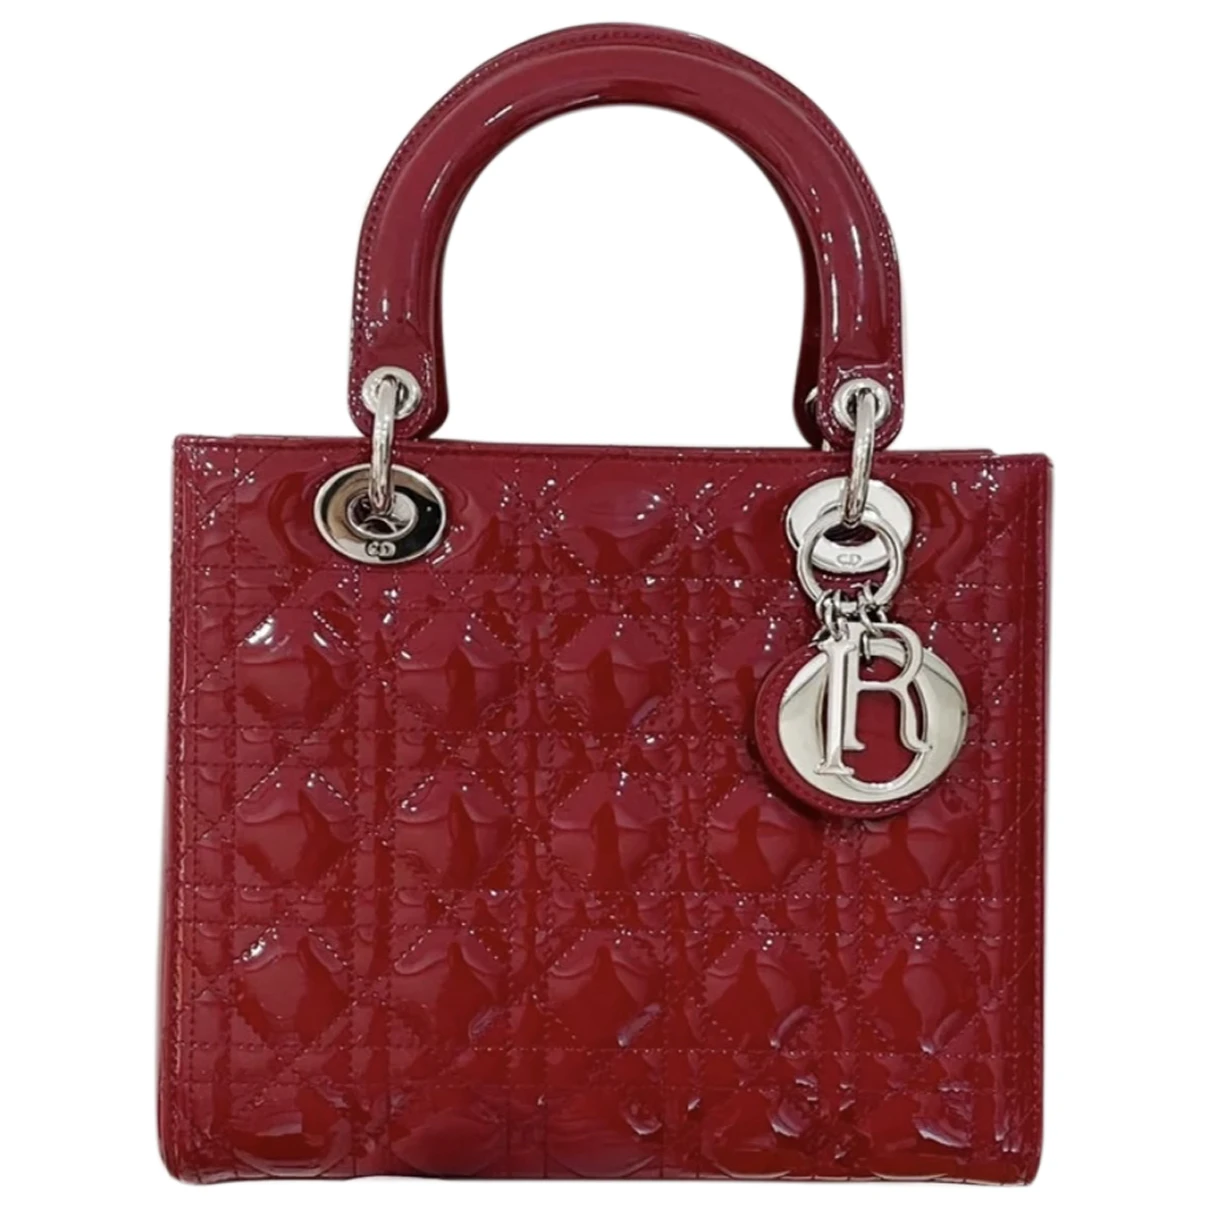 Pre-owned Dior Patent Leather Handbag In Burgundy